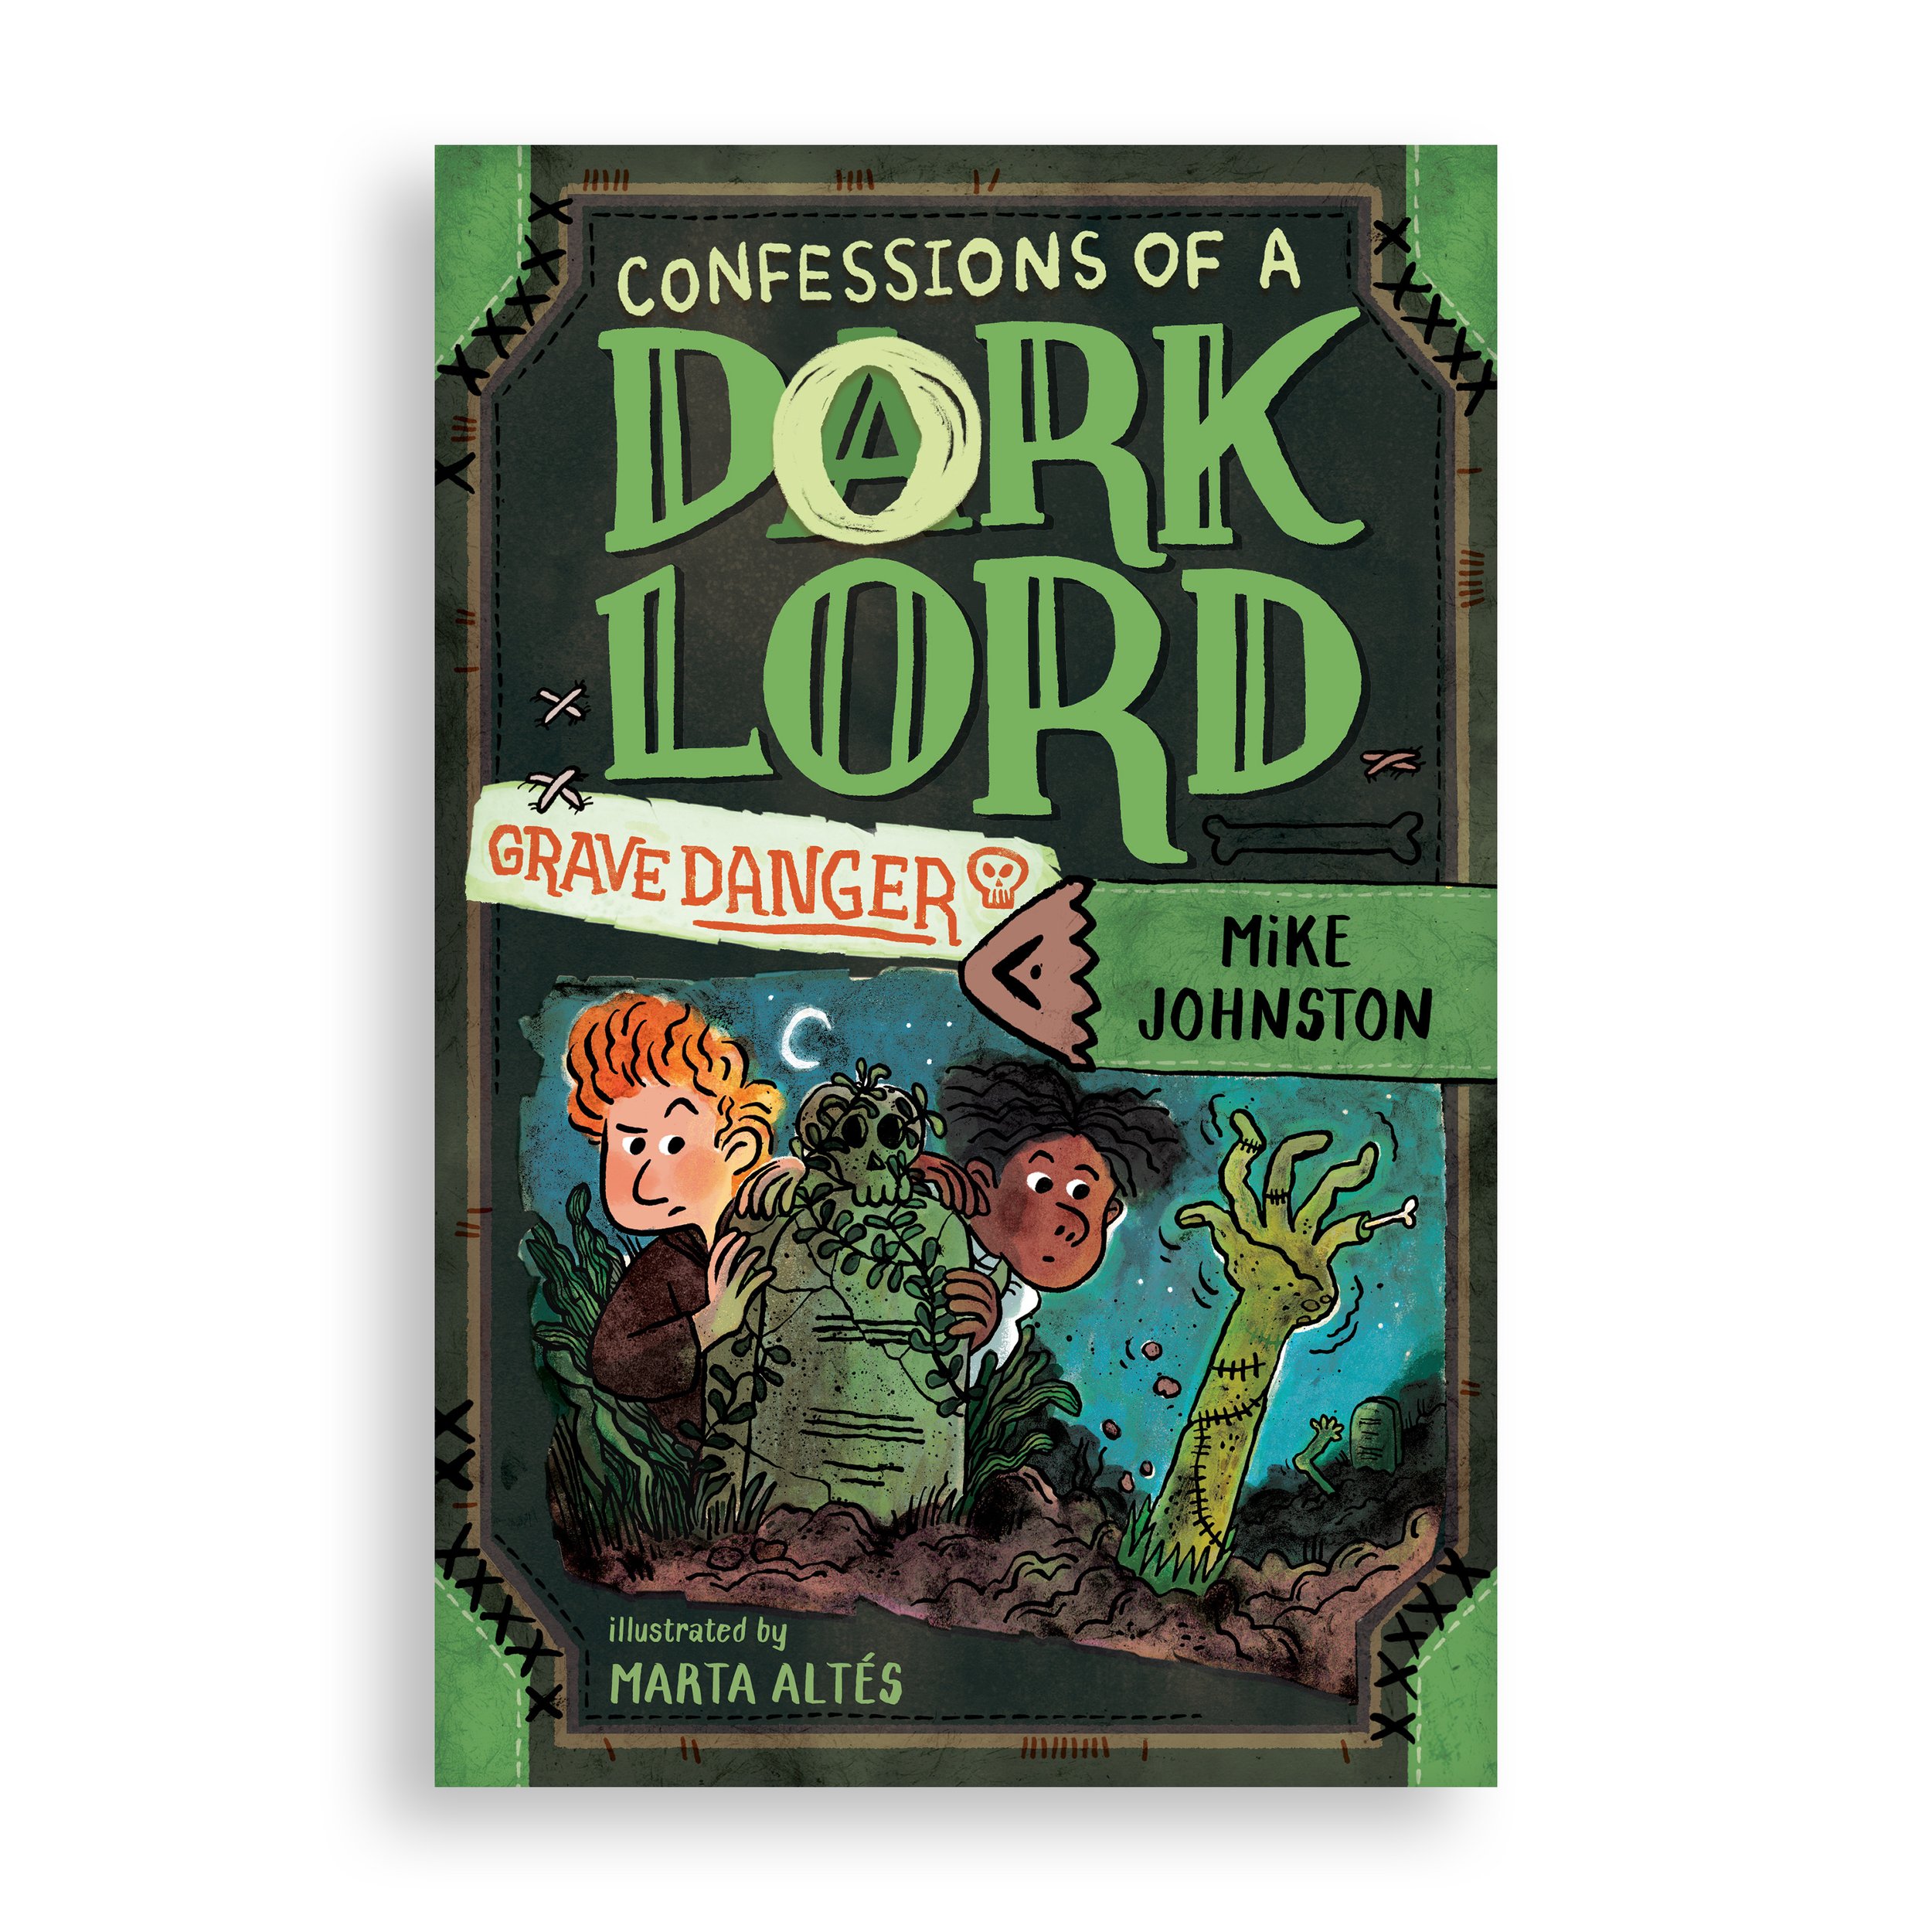 Confessions of a Dork Lord: Grave Danger